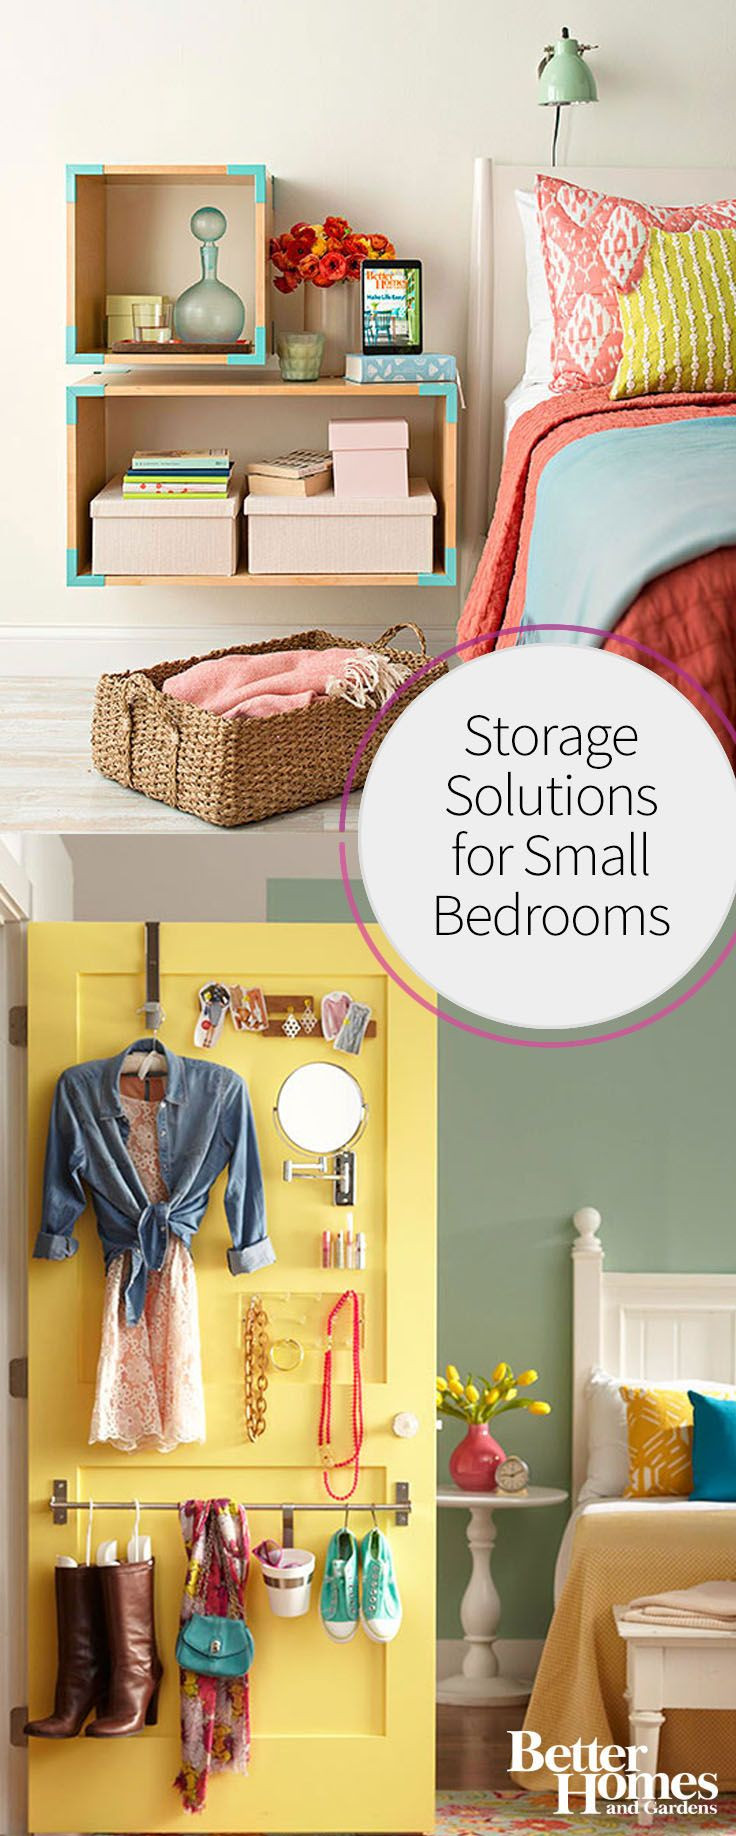 Cheap Bedroom Storage Ideas
 19 Genius Ways to Store More in Your Small Bedroom